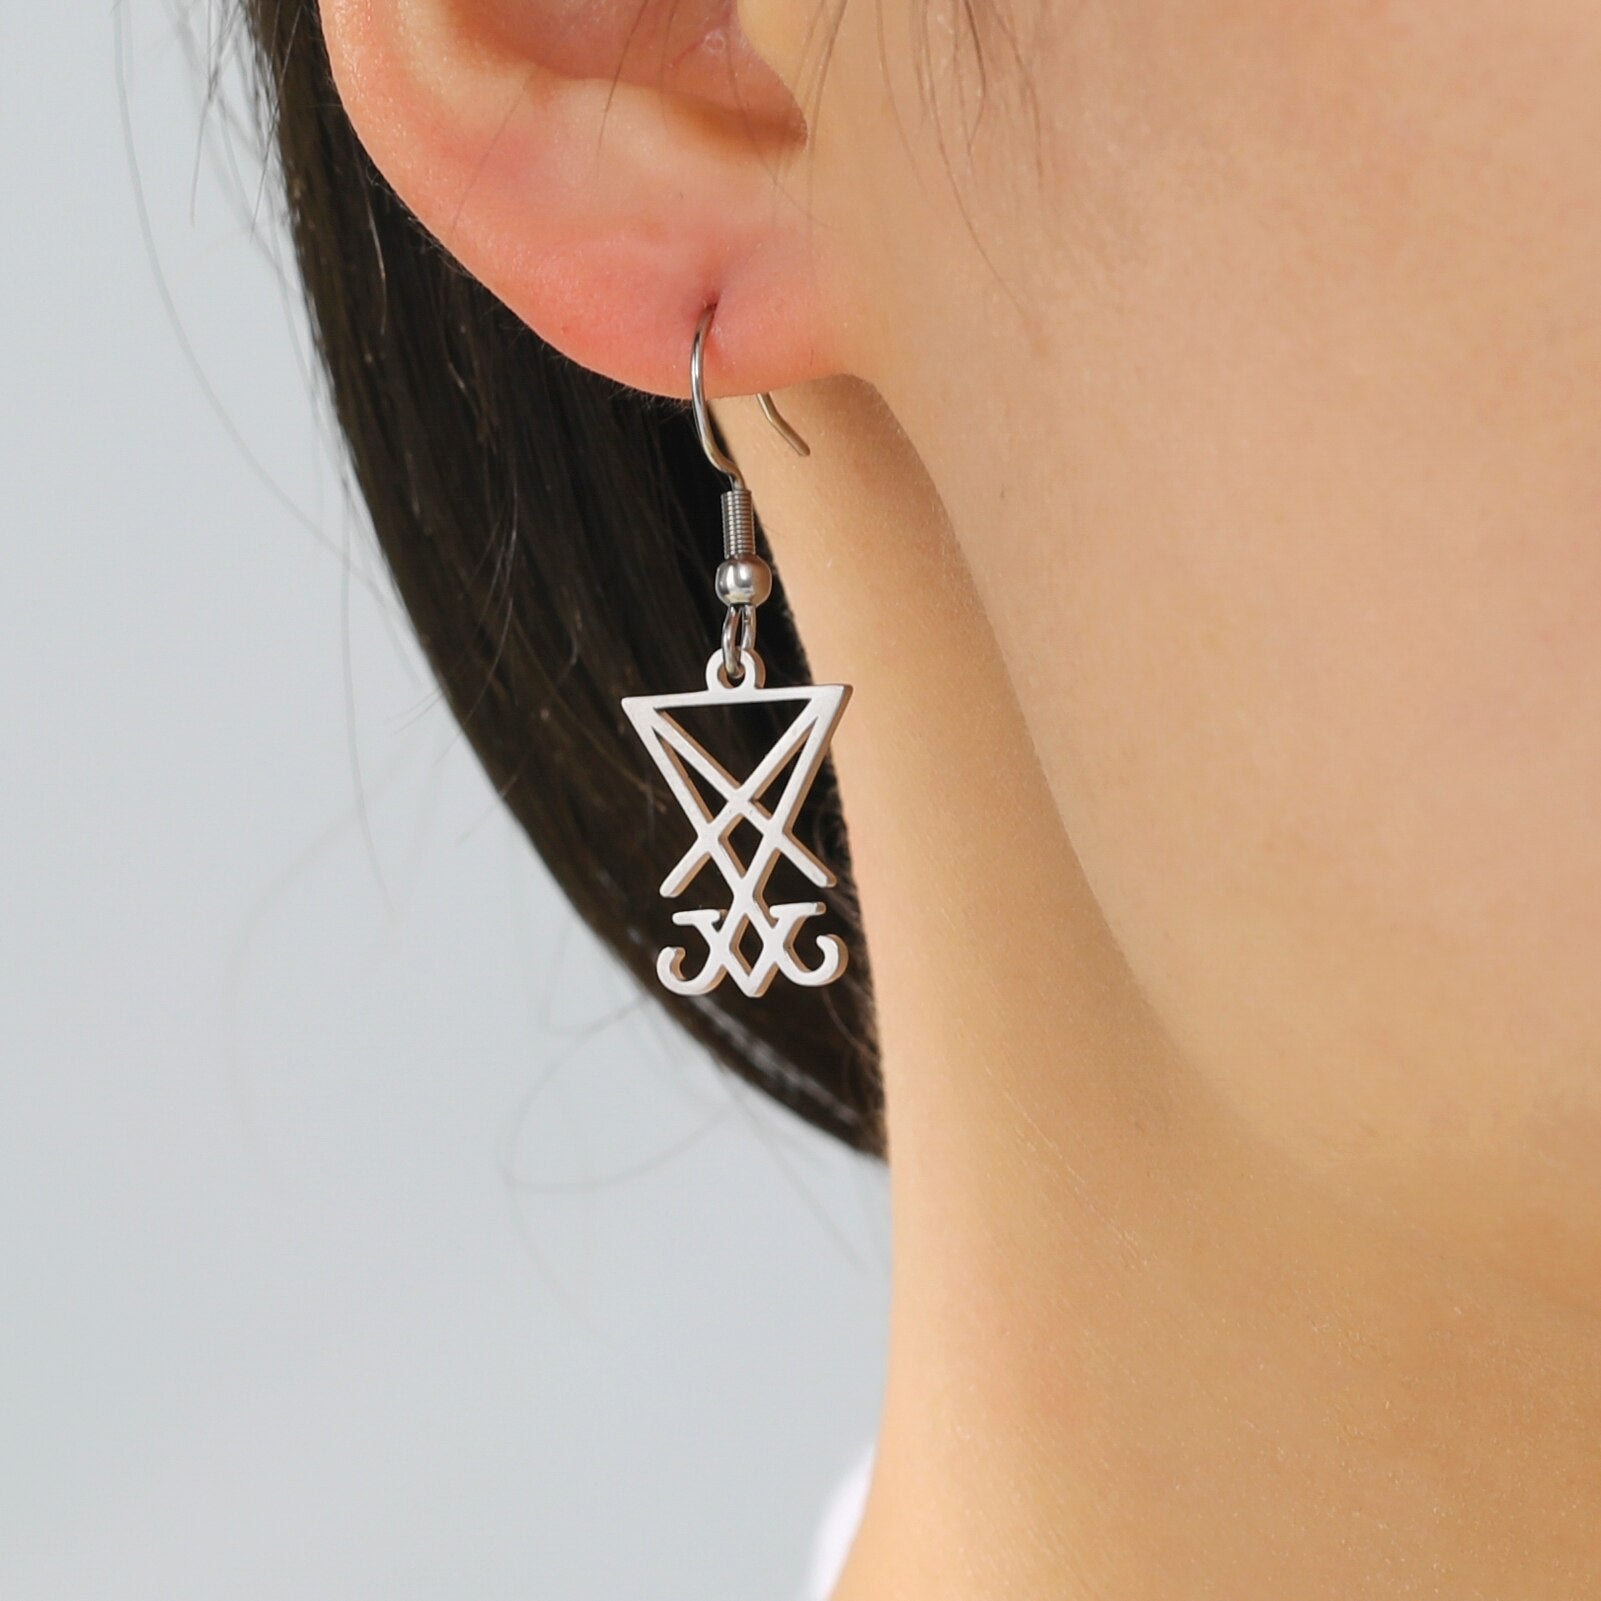 Kundalini - Dawapara Sigil of Lucifer Earrings Stainless Steel Occult Goth Gothic Pendants Luciferian Satainism Signet Wiccan Amulet Jewelry - Personal Hour for Yoga and Meditations 